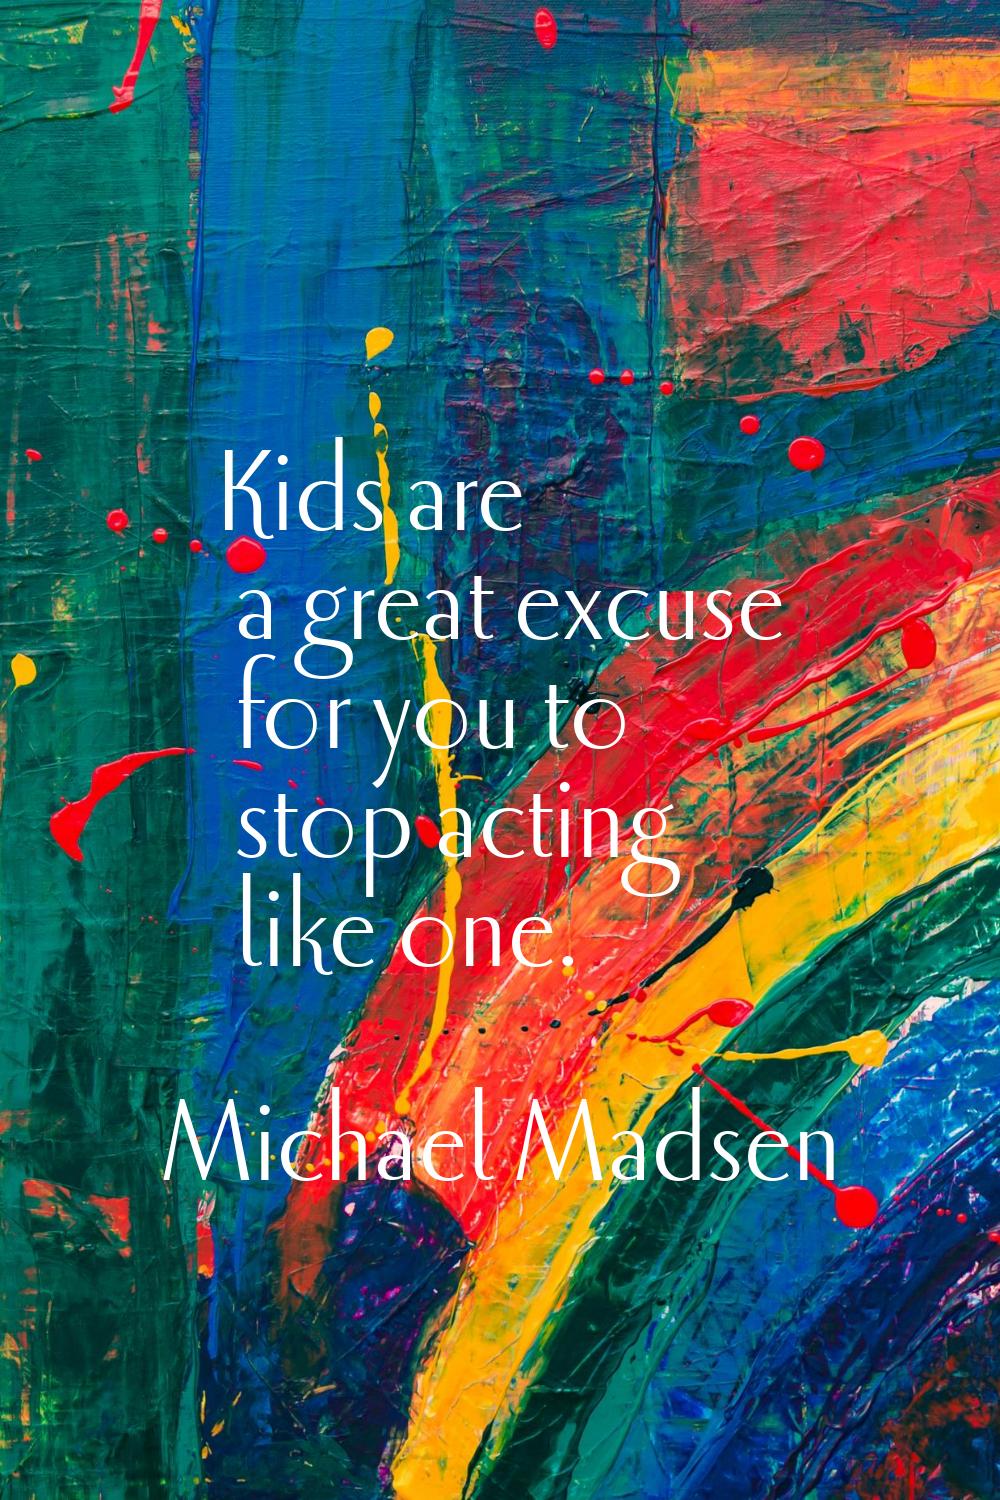 Kids are a great excuse for you to stop acting like one.